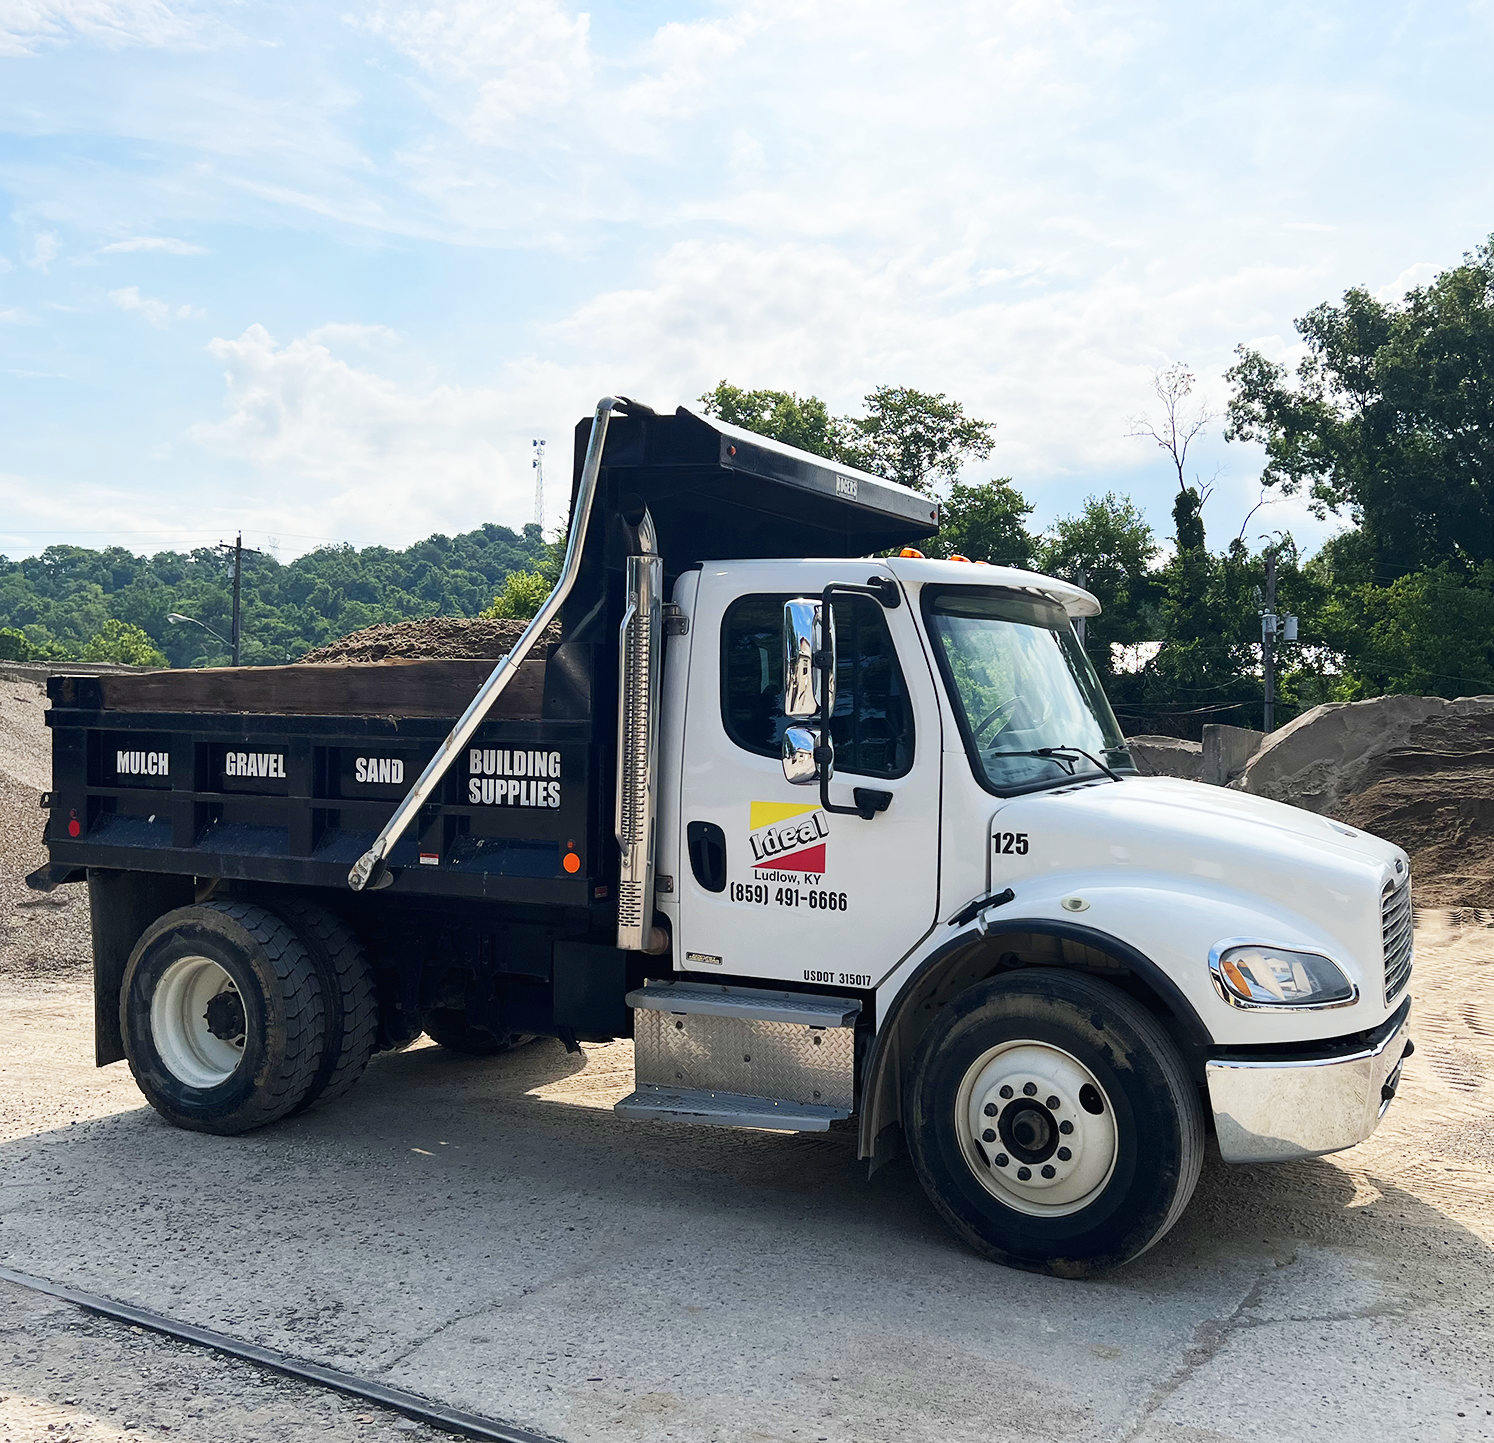 Ideal Supplies can deliver to your worksite or your home.We also deliver concrete.